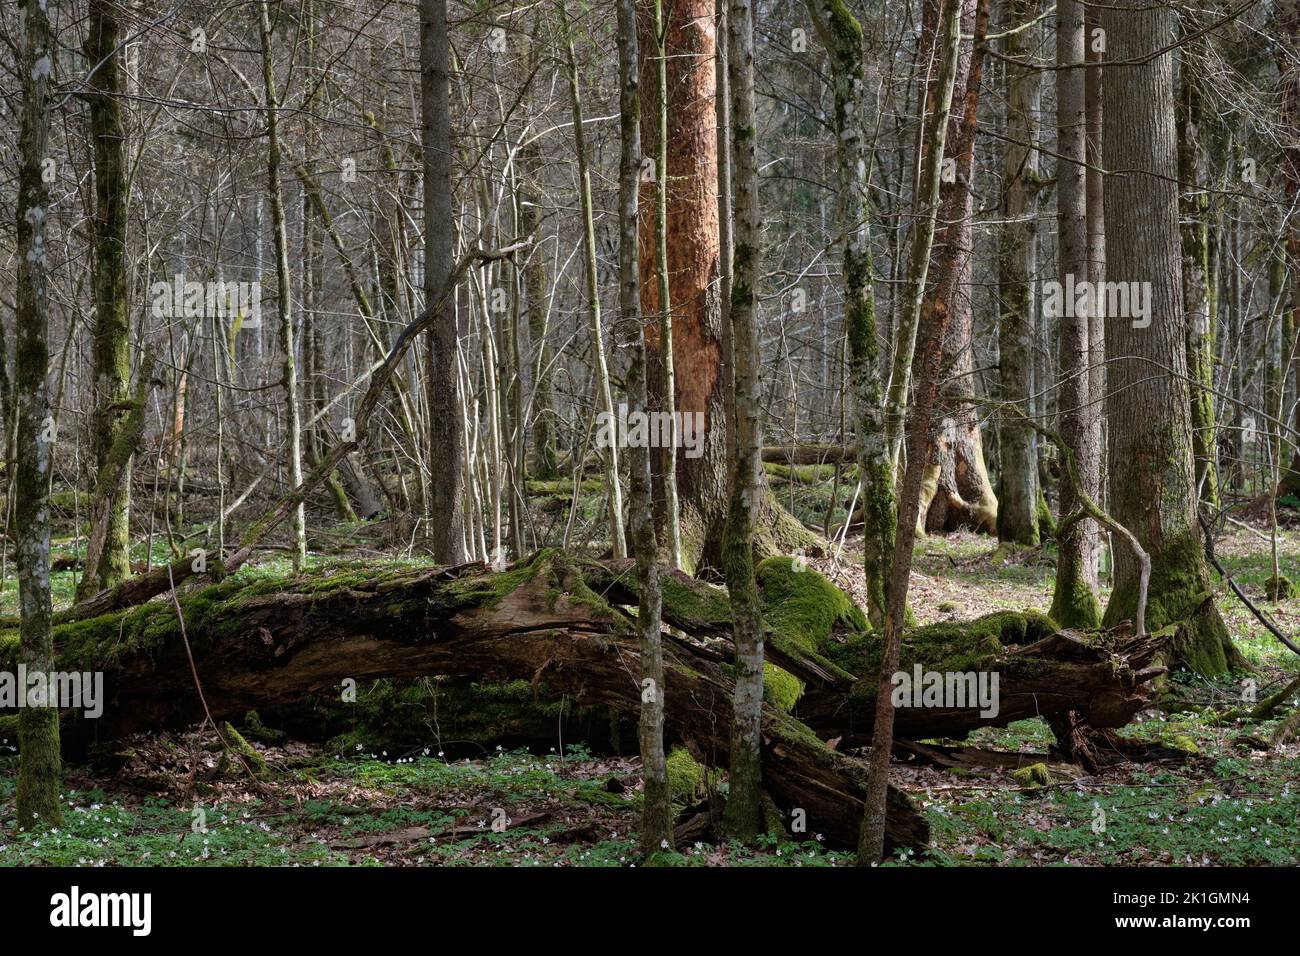 Deciduous tree stand with hornbeams and oaks with broken tree in background, Bialowieza Forest, Poland, Europe Stock Photo